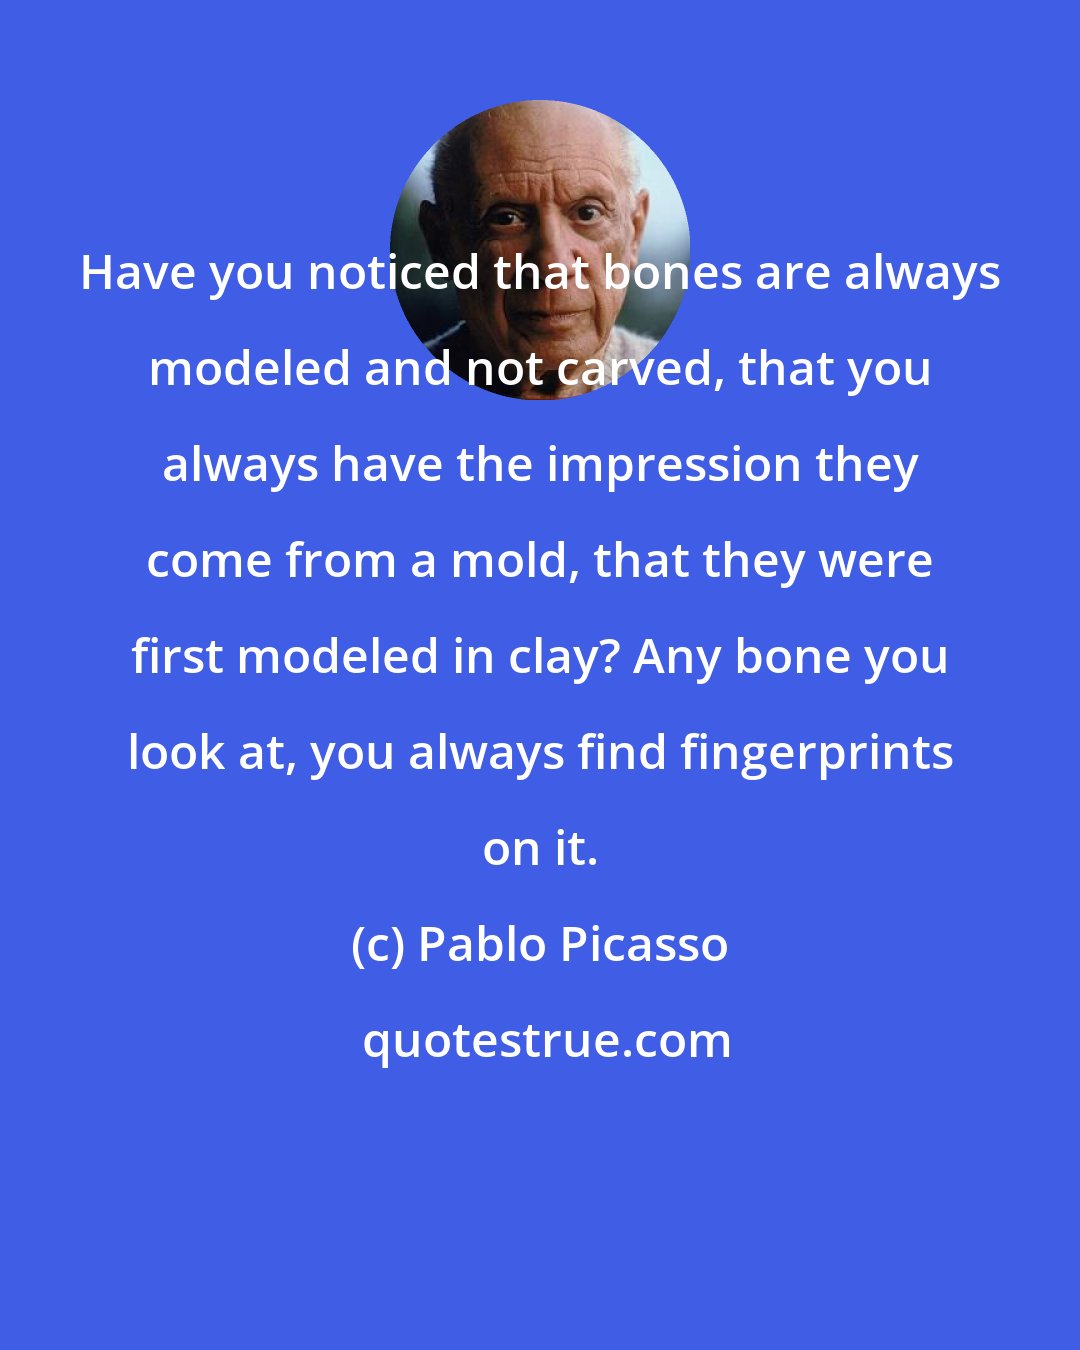 Pablo Picasso: Have you noticed that bones are always modeled and not carved, that you always have the impression they come from a mold, that they were first modeled in clay? Any bone you look at, you always find fingerprints on it.